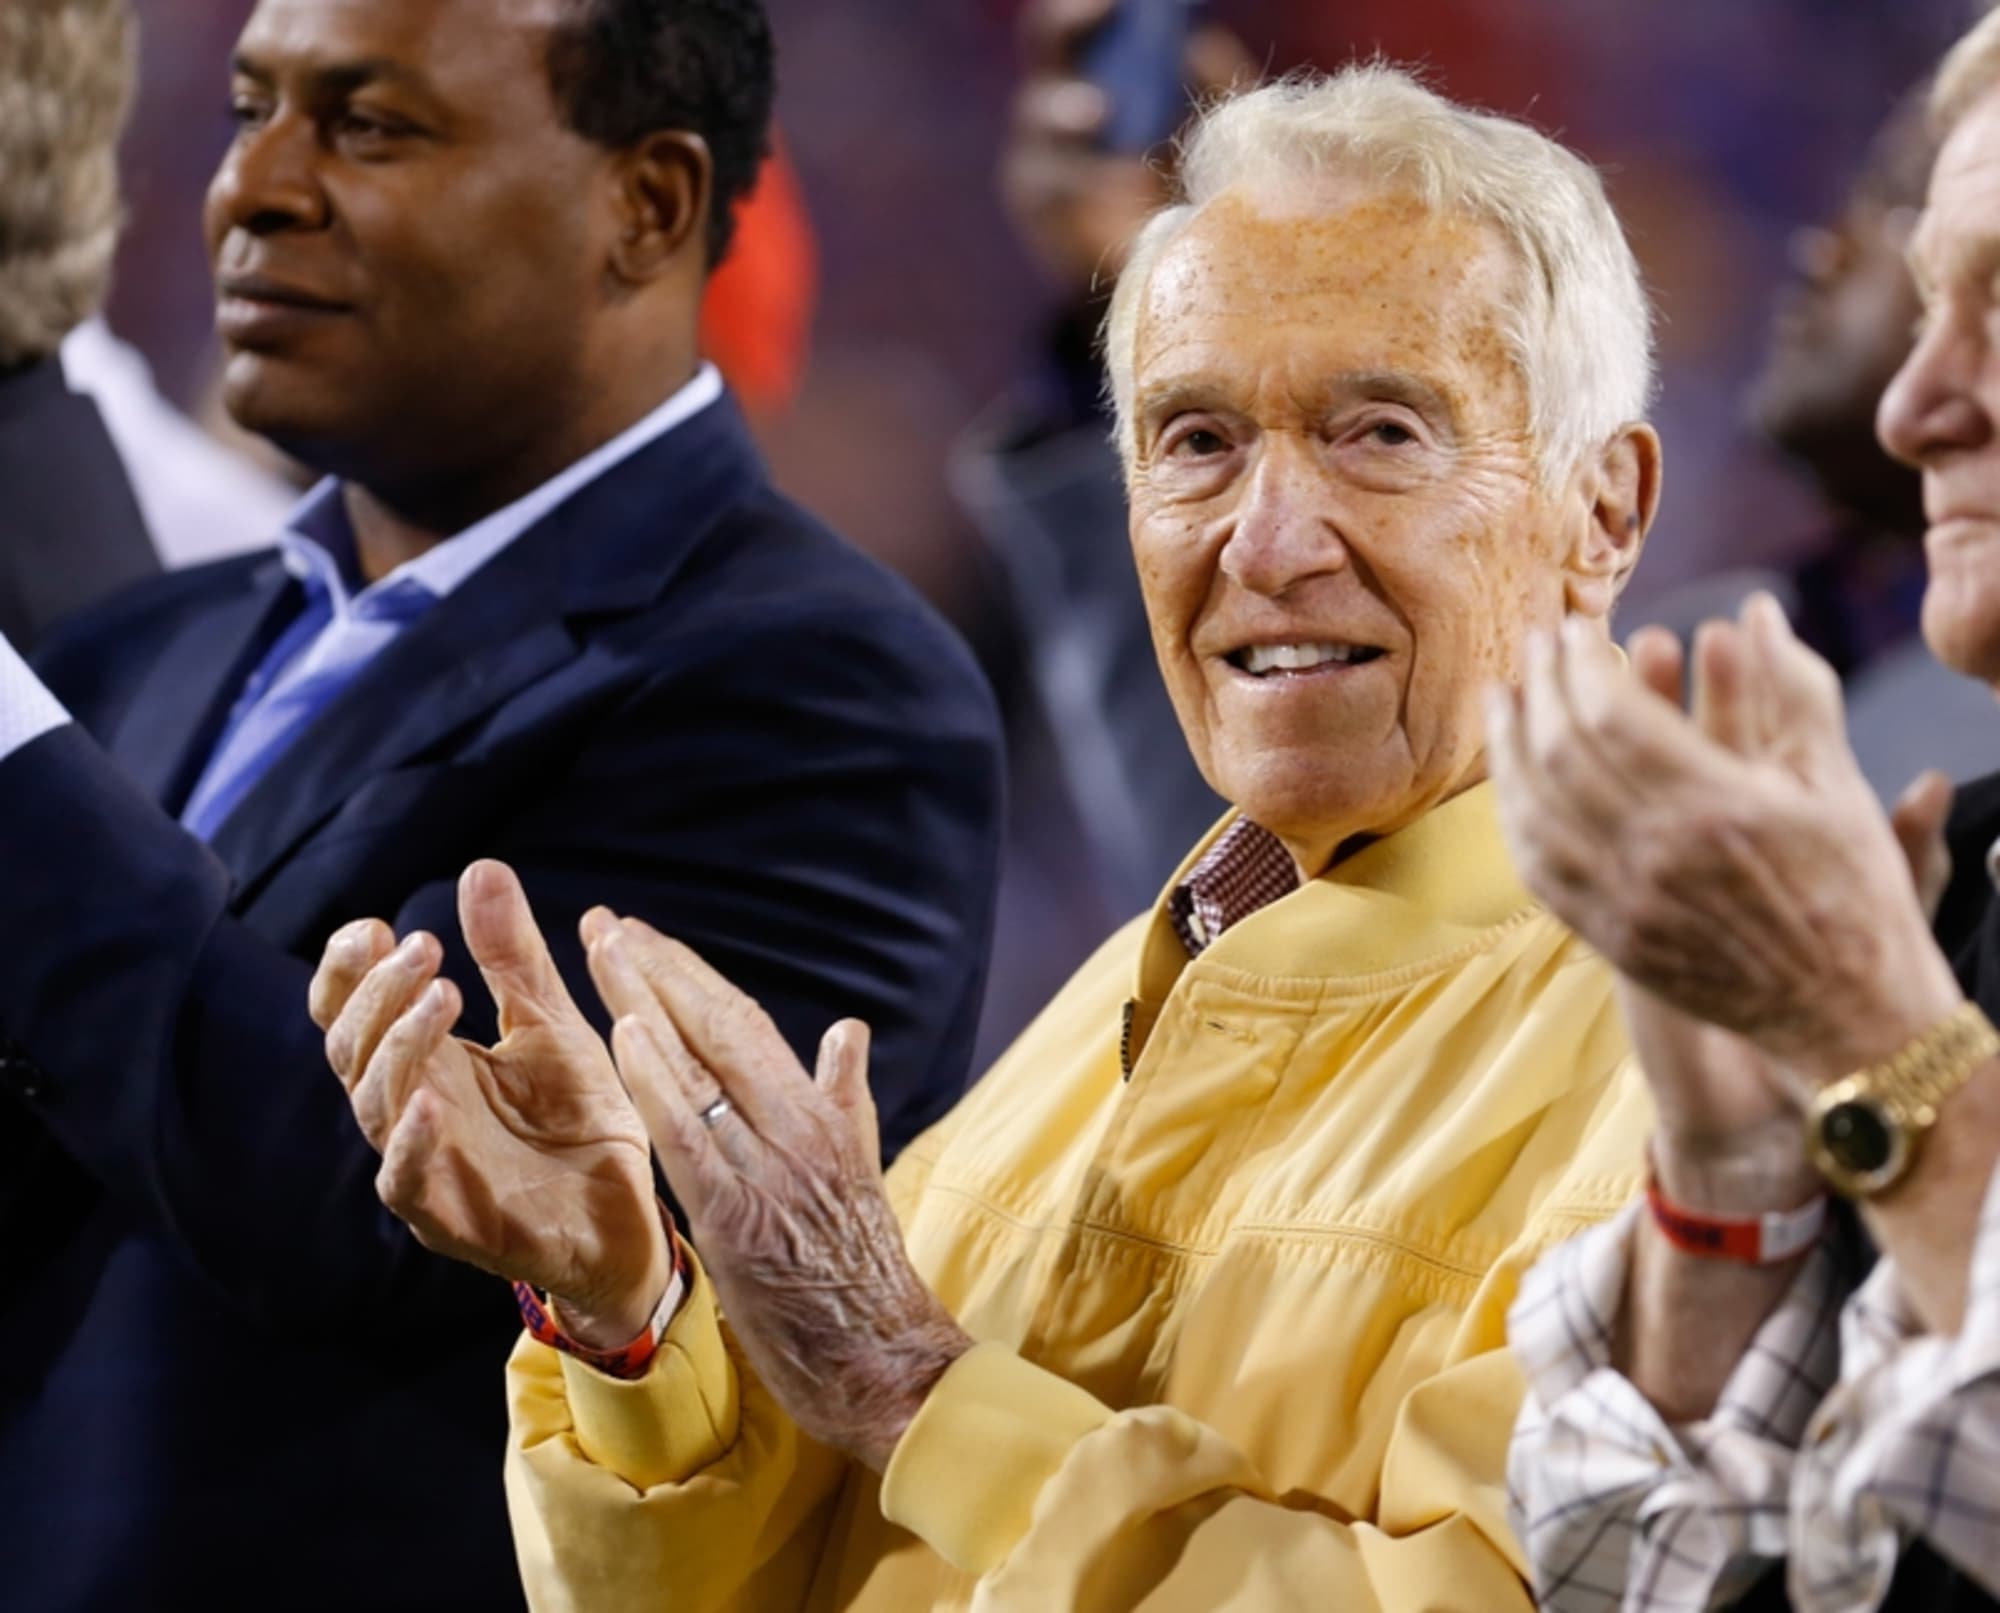 Buffalo Bills: Marv Levy as Head Coach is not the Solution